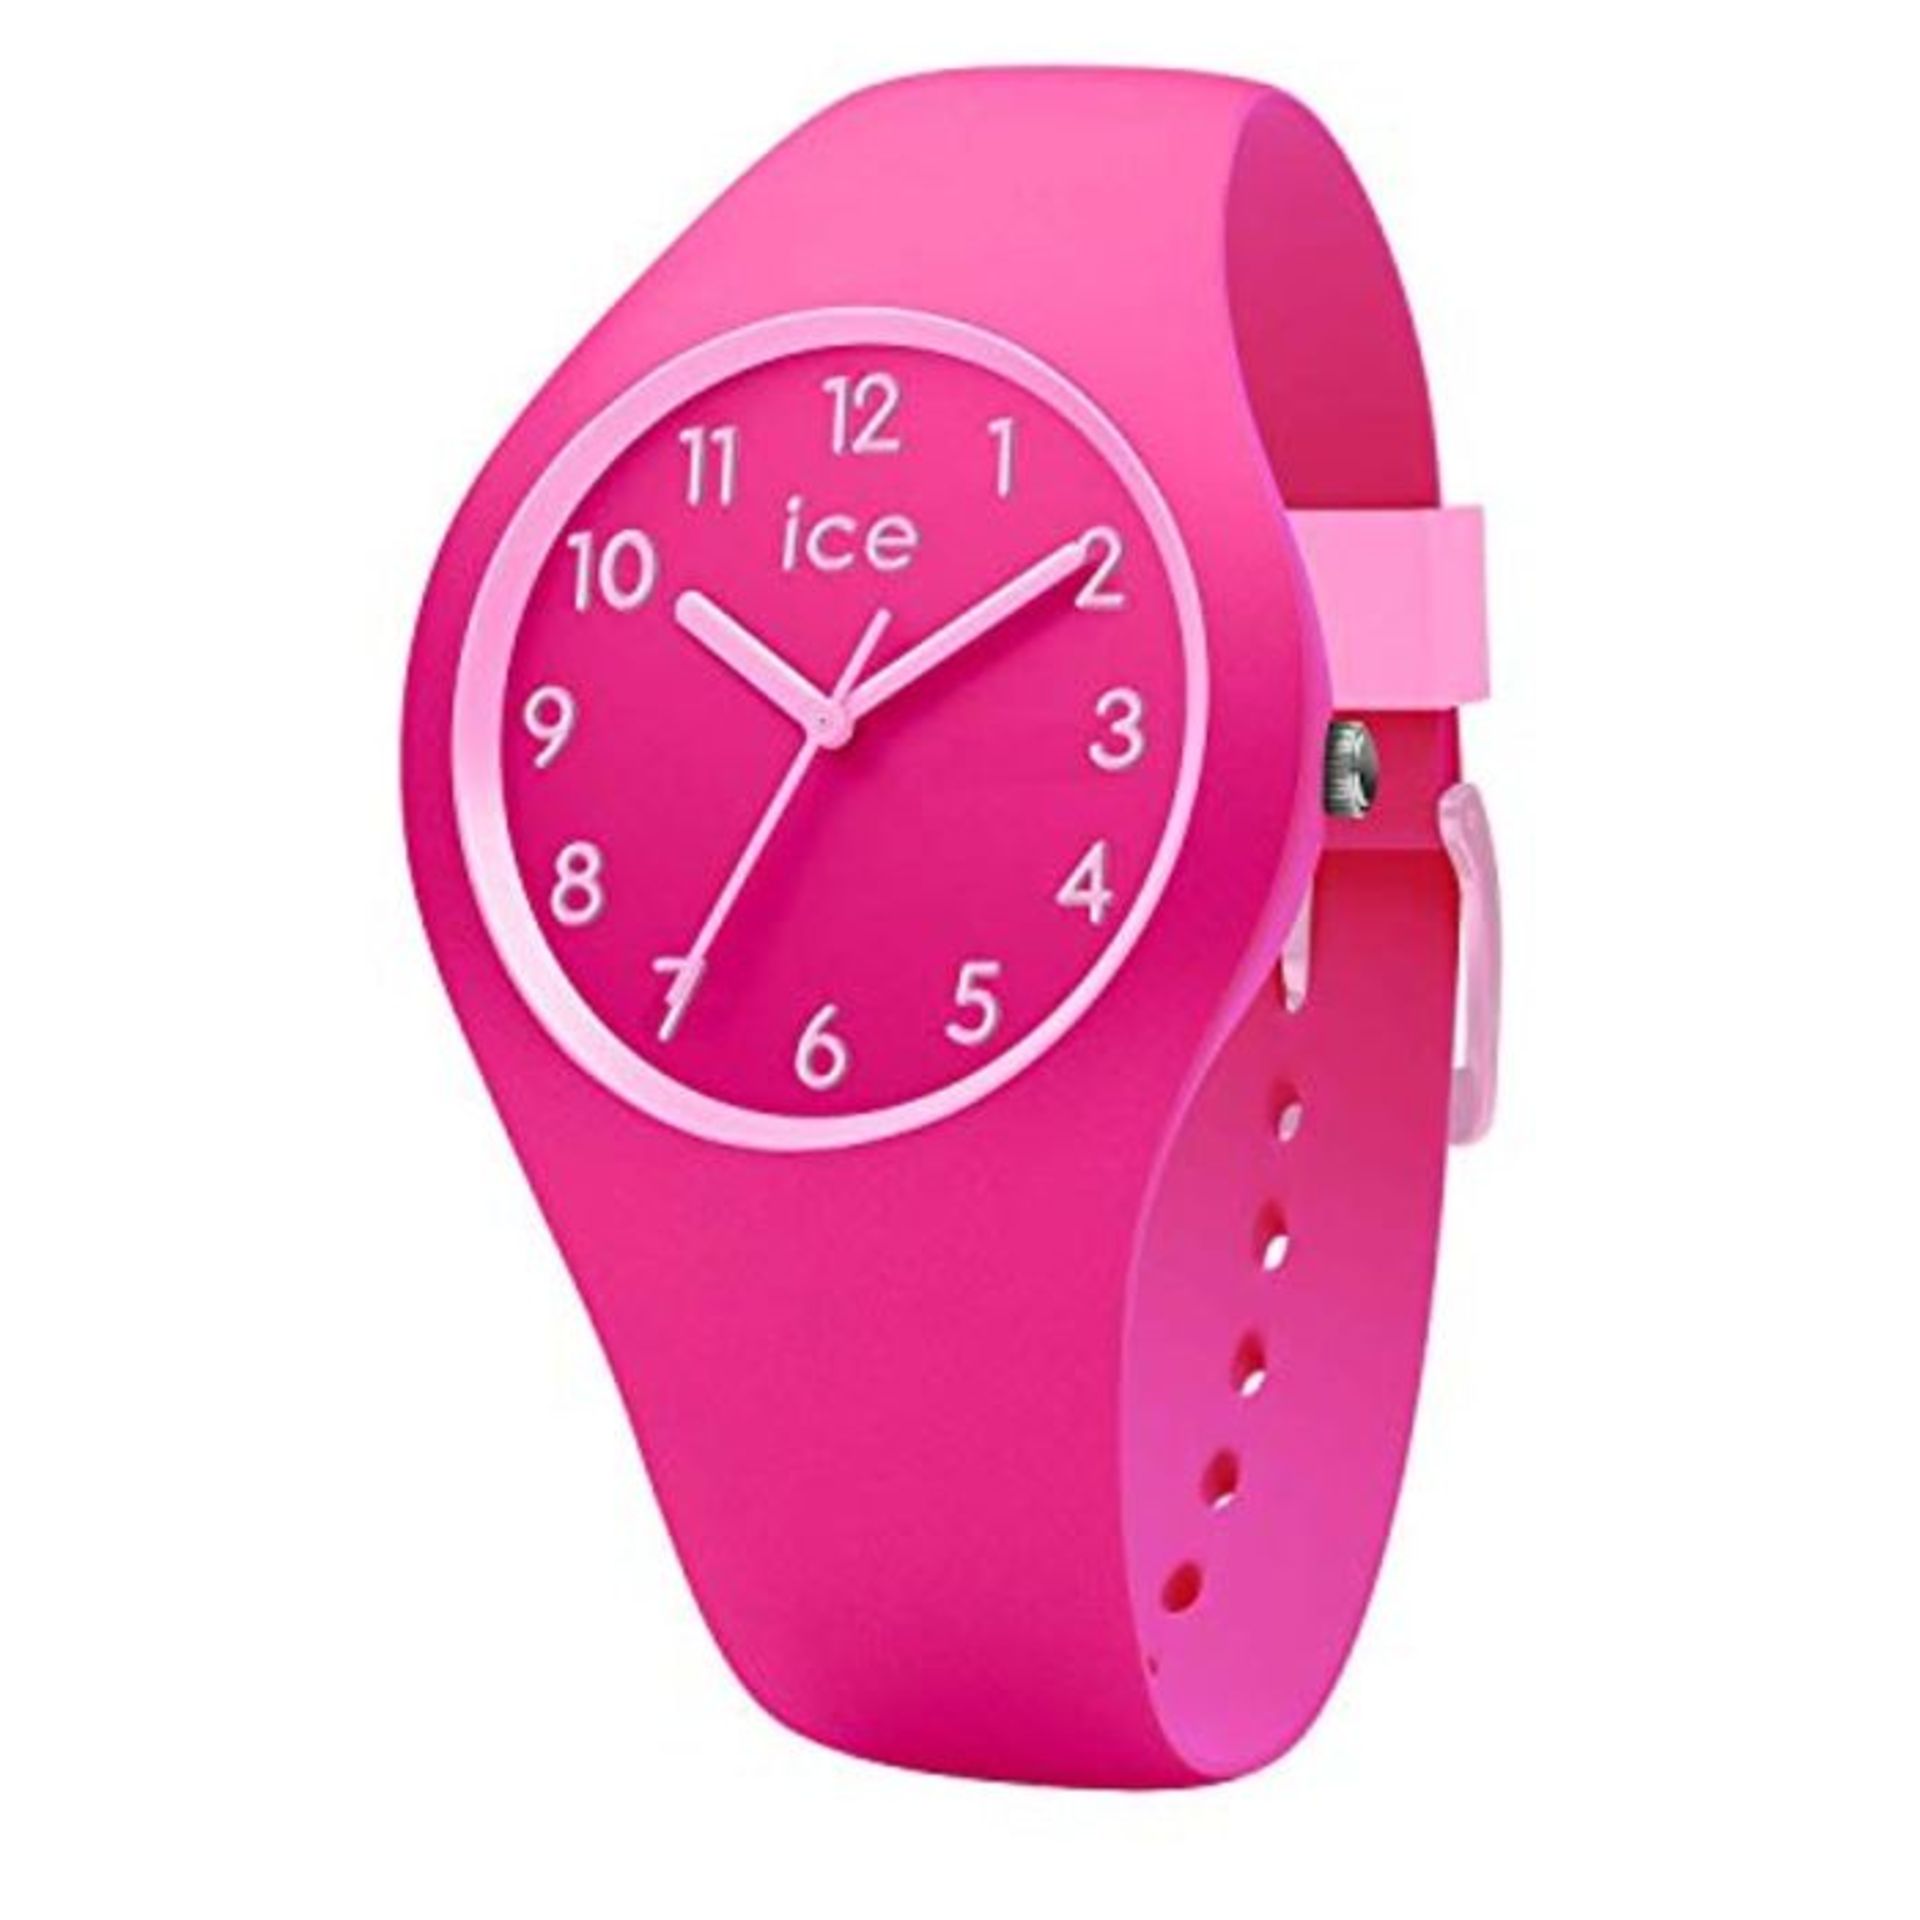 Ice-Watch - ICE Ola Kids Fairy tale - Girl's Wristwatch with Silicon Strap - 014430 (S